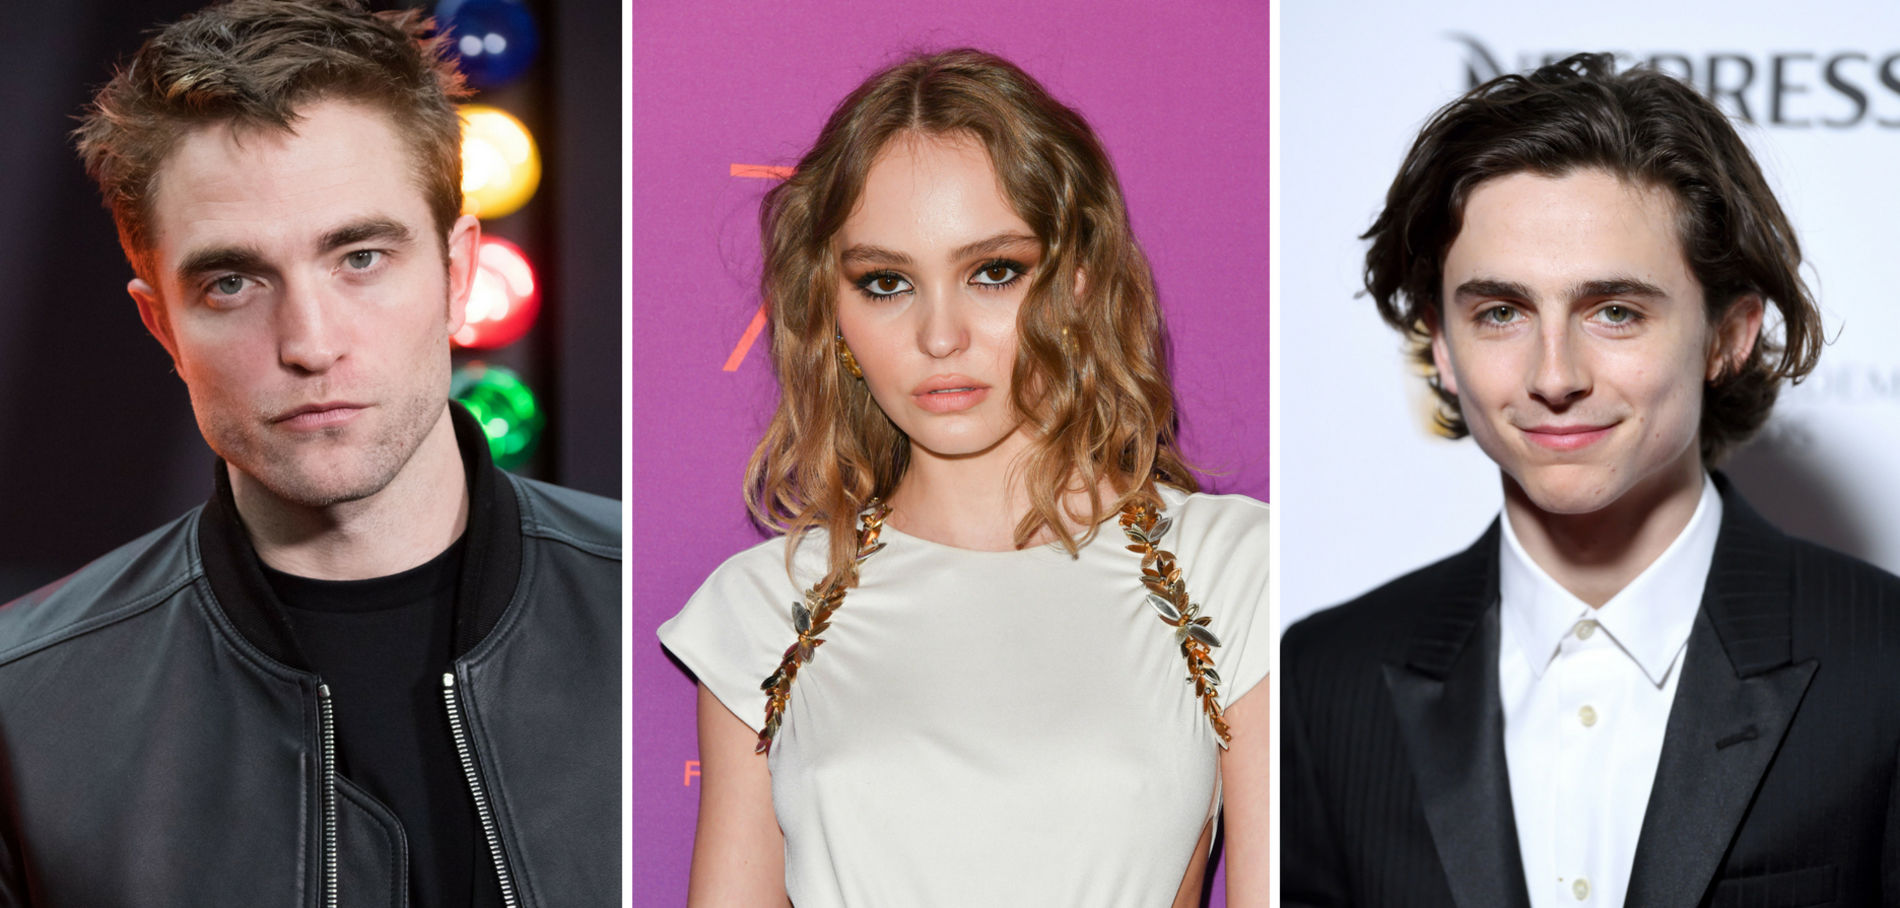 Robert Pattinson And Lily-Rose Depp Joins Cast Of Netflix's 'The King' | Film News ...